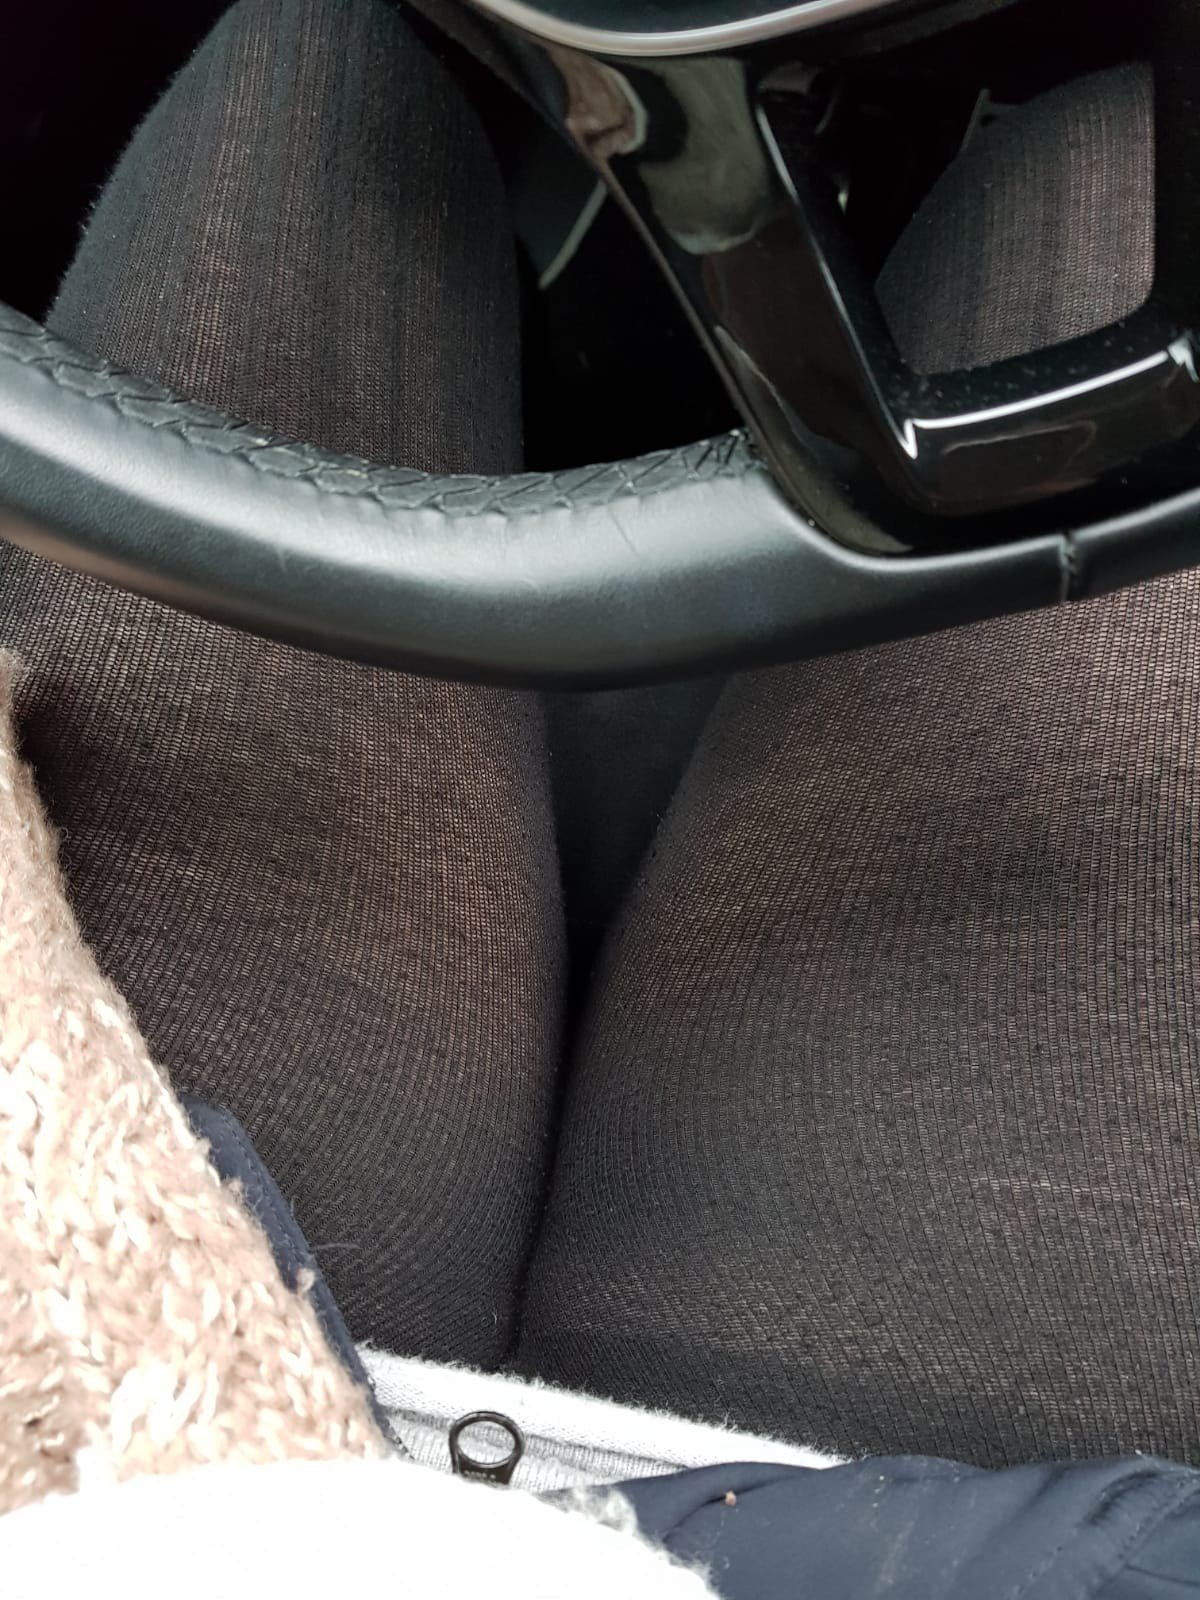 Photo by KittykatundLover with the username @KittykatundLover, who is a verified user,  March 15, 2022 at 10:27 AM. The post is about the topic Stockings and the text says 'Ein paar Selfies aus dem Auto gefällig??? Gerne doch ;-) Hoffe sie gefallen euch'